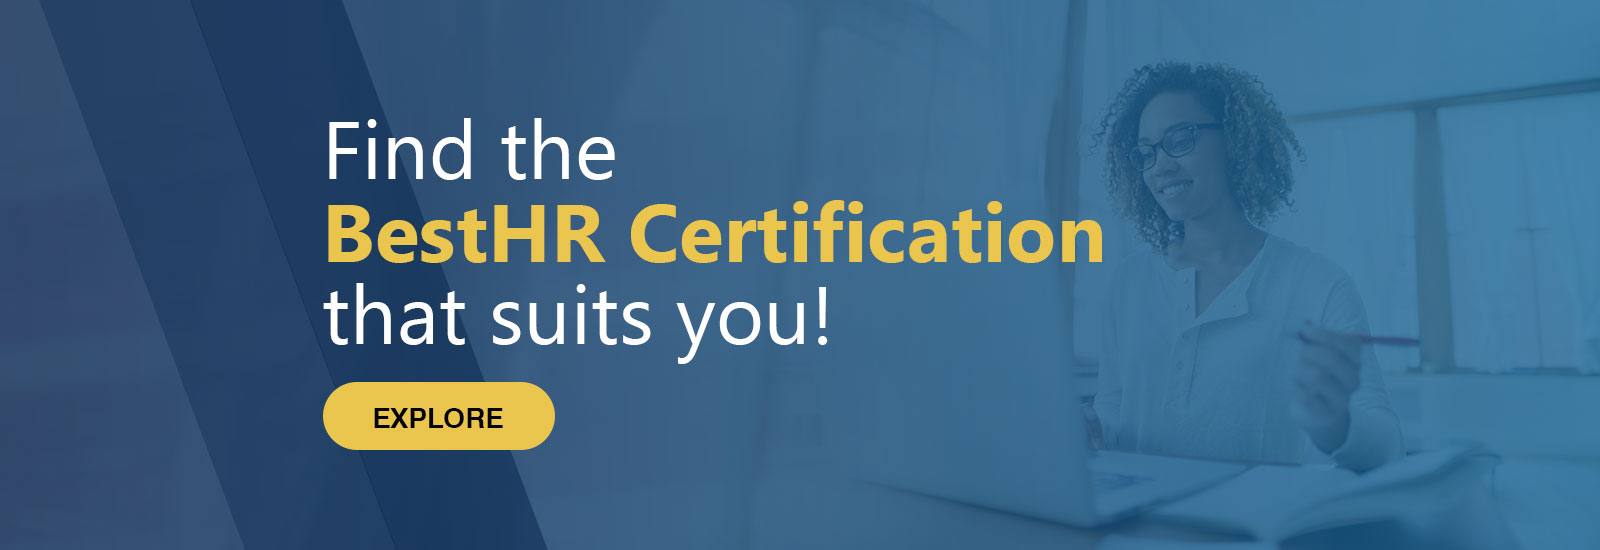 Find the BestHR Certification that suits you!